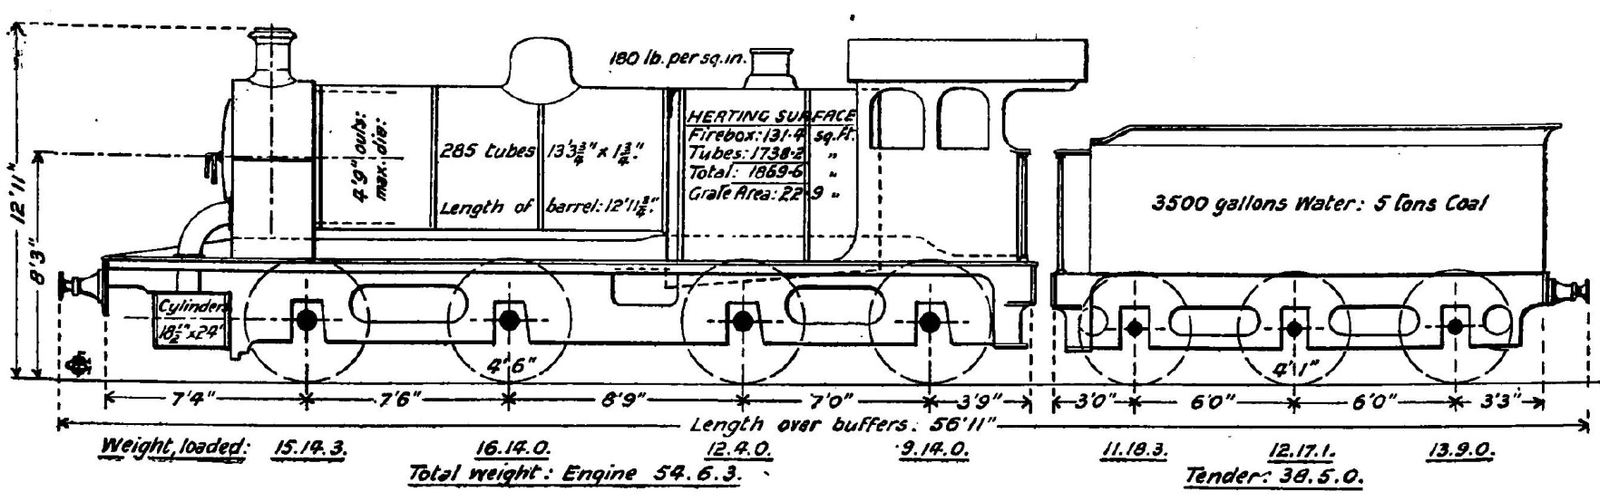 Schematic drawing of the A55R with dimensions